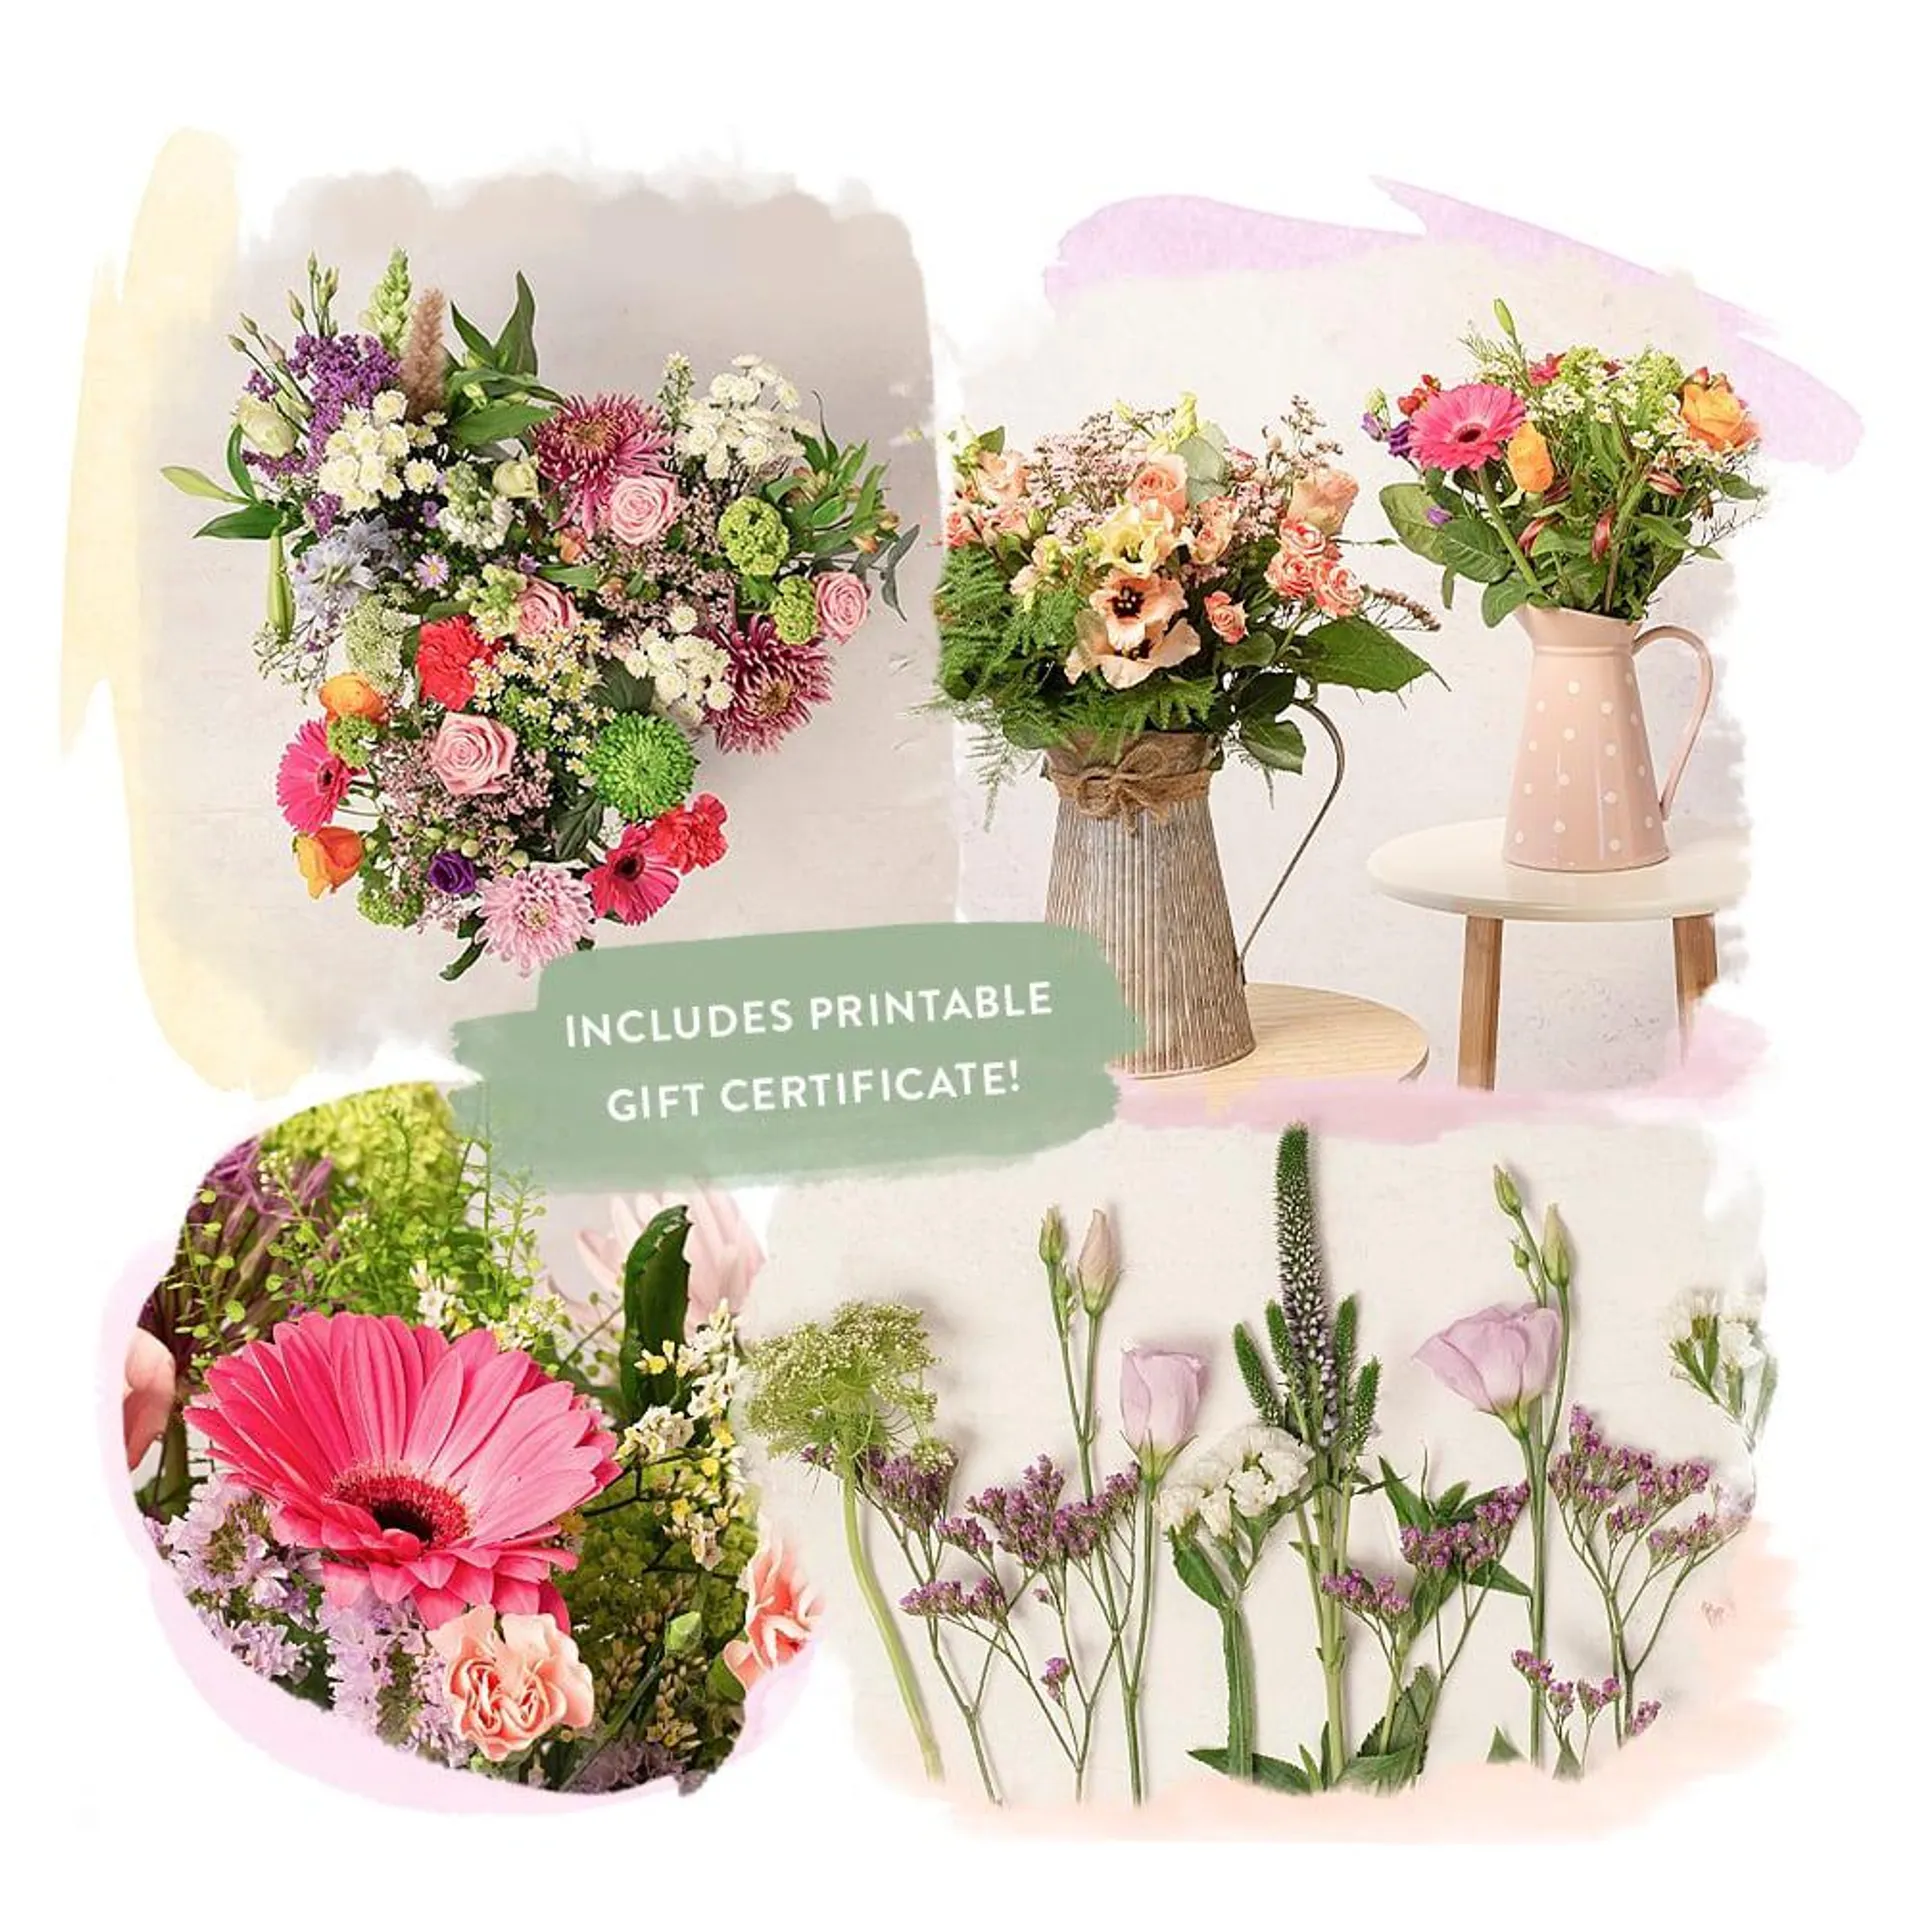 FLOWER SUBSCRIPTION GIFTS